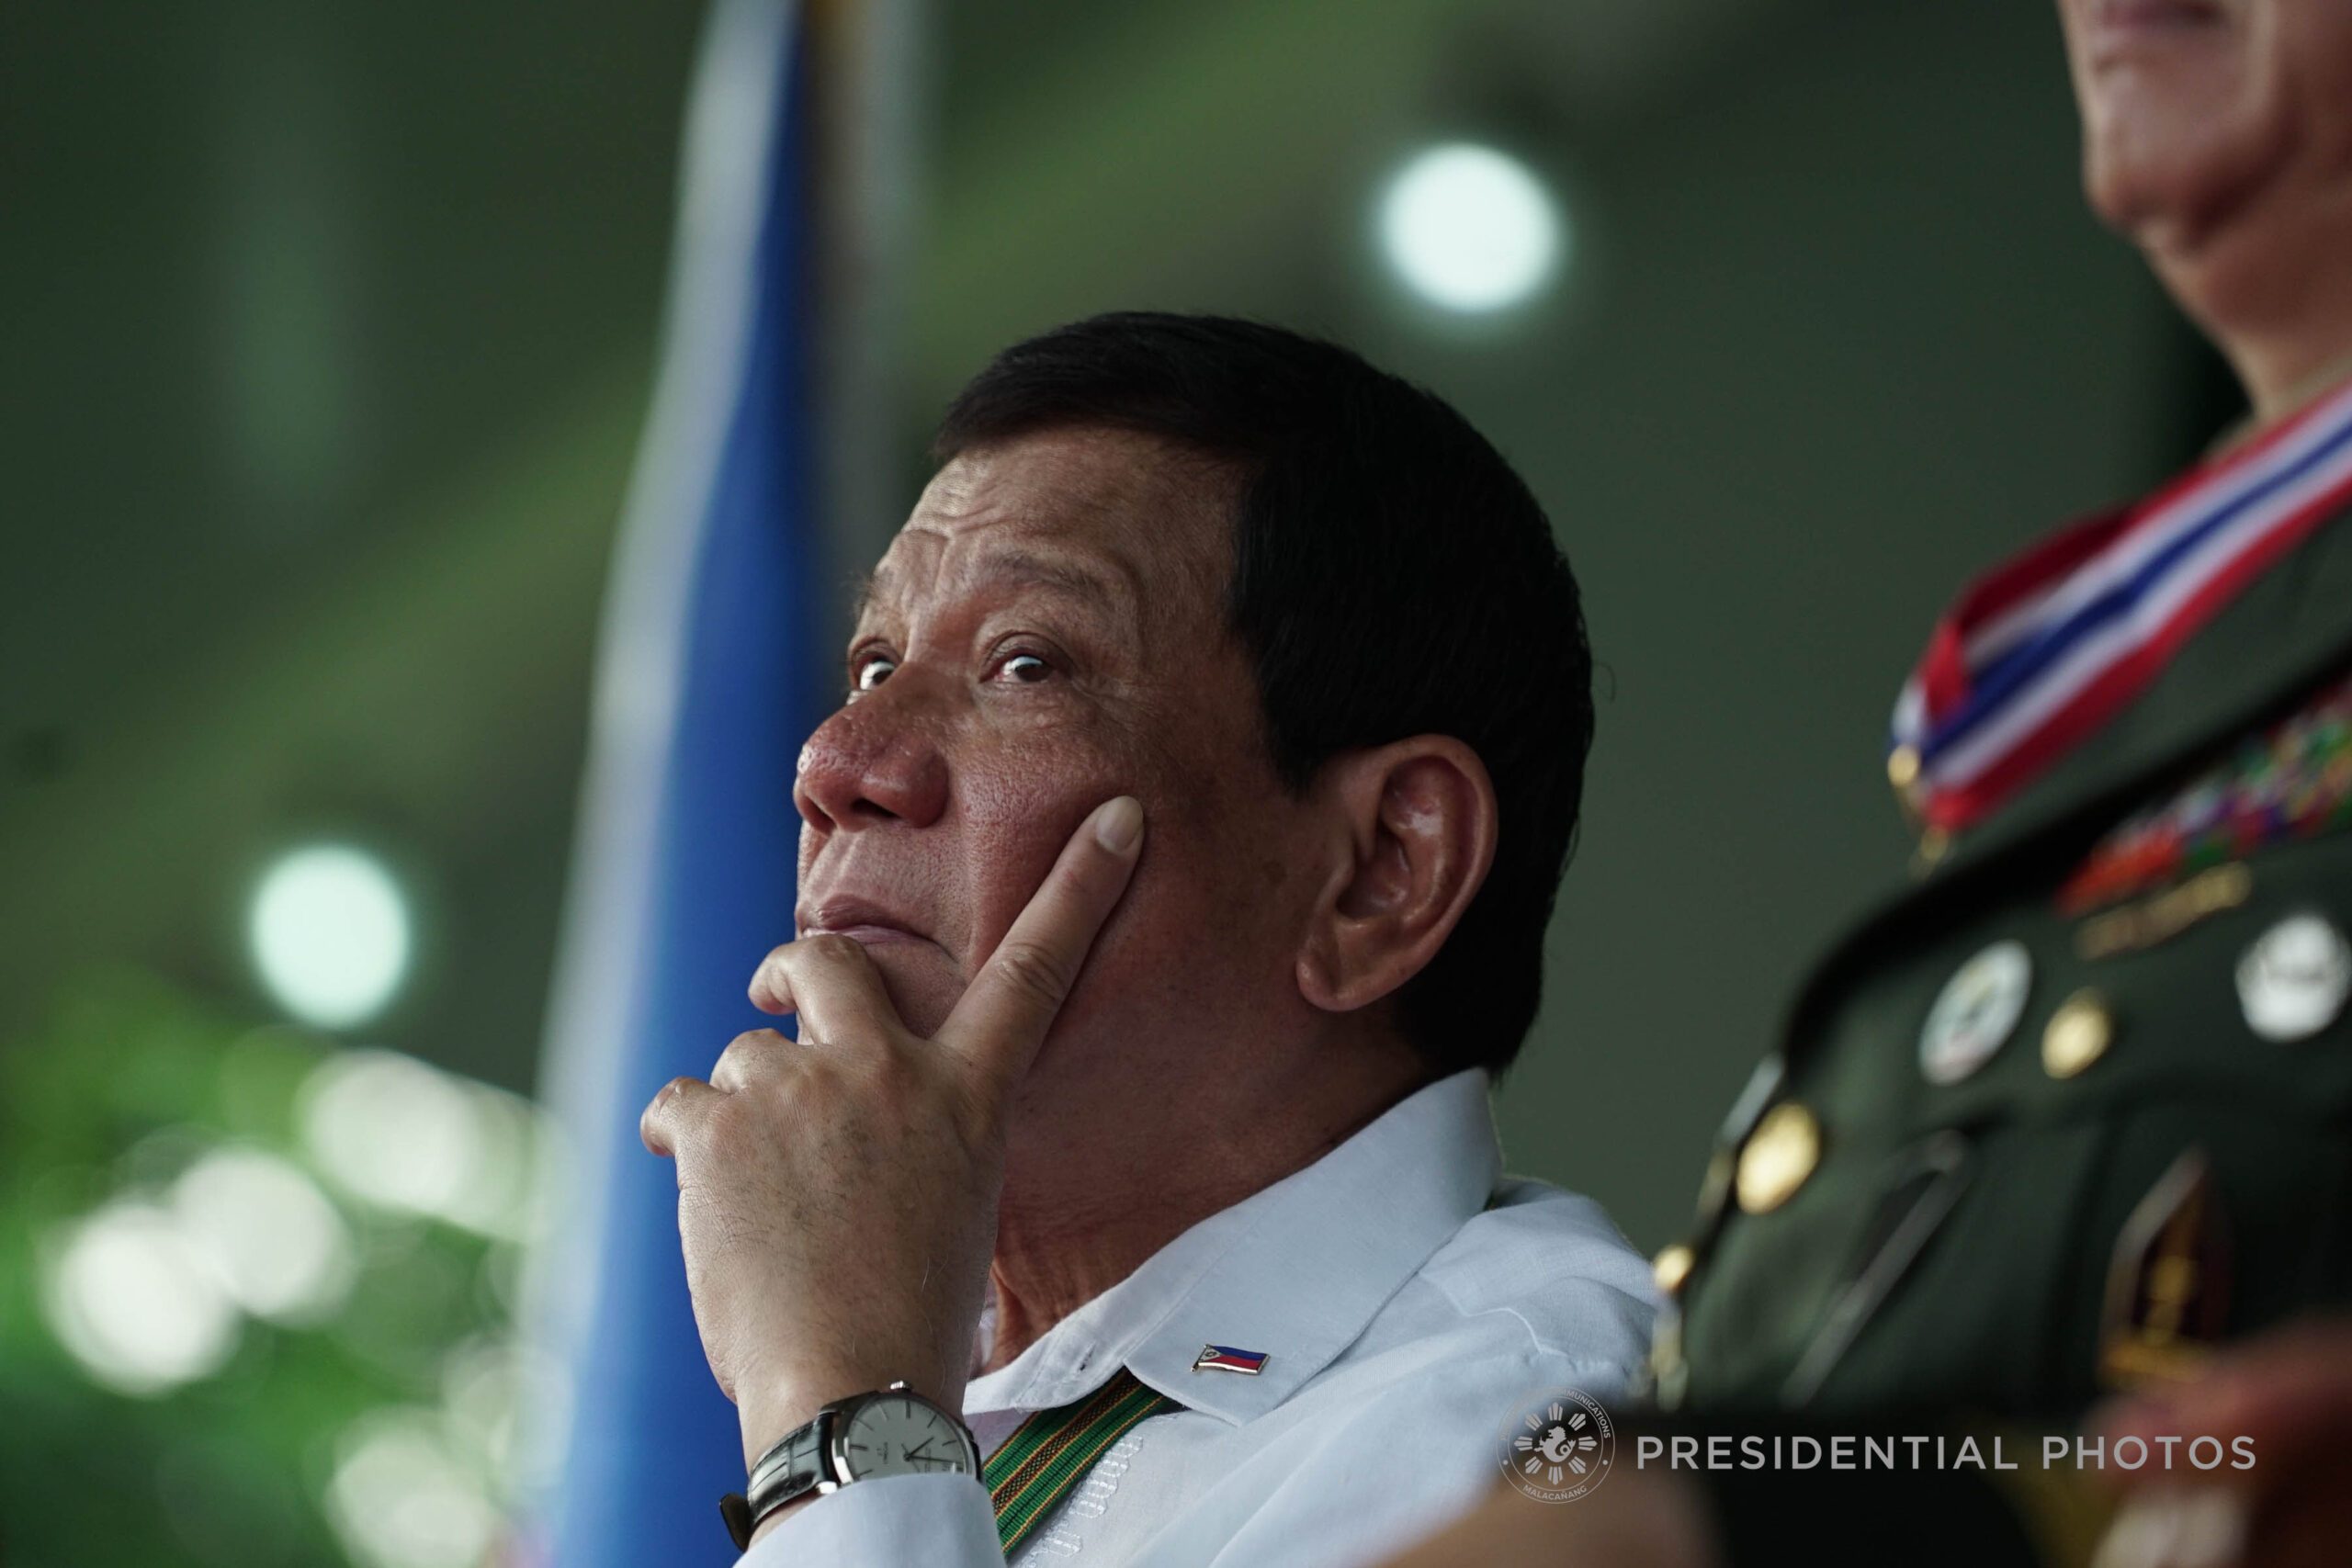 Duterte ratings dip expected but ‘love still there’ – Malacañang